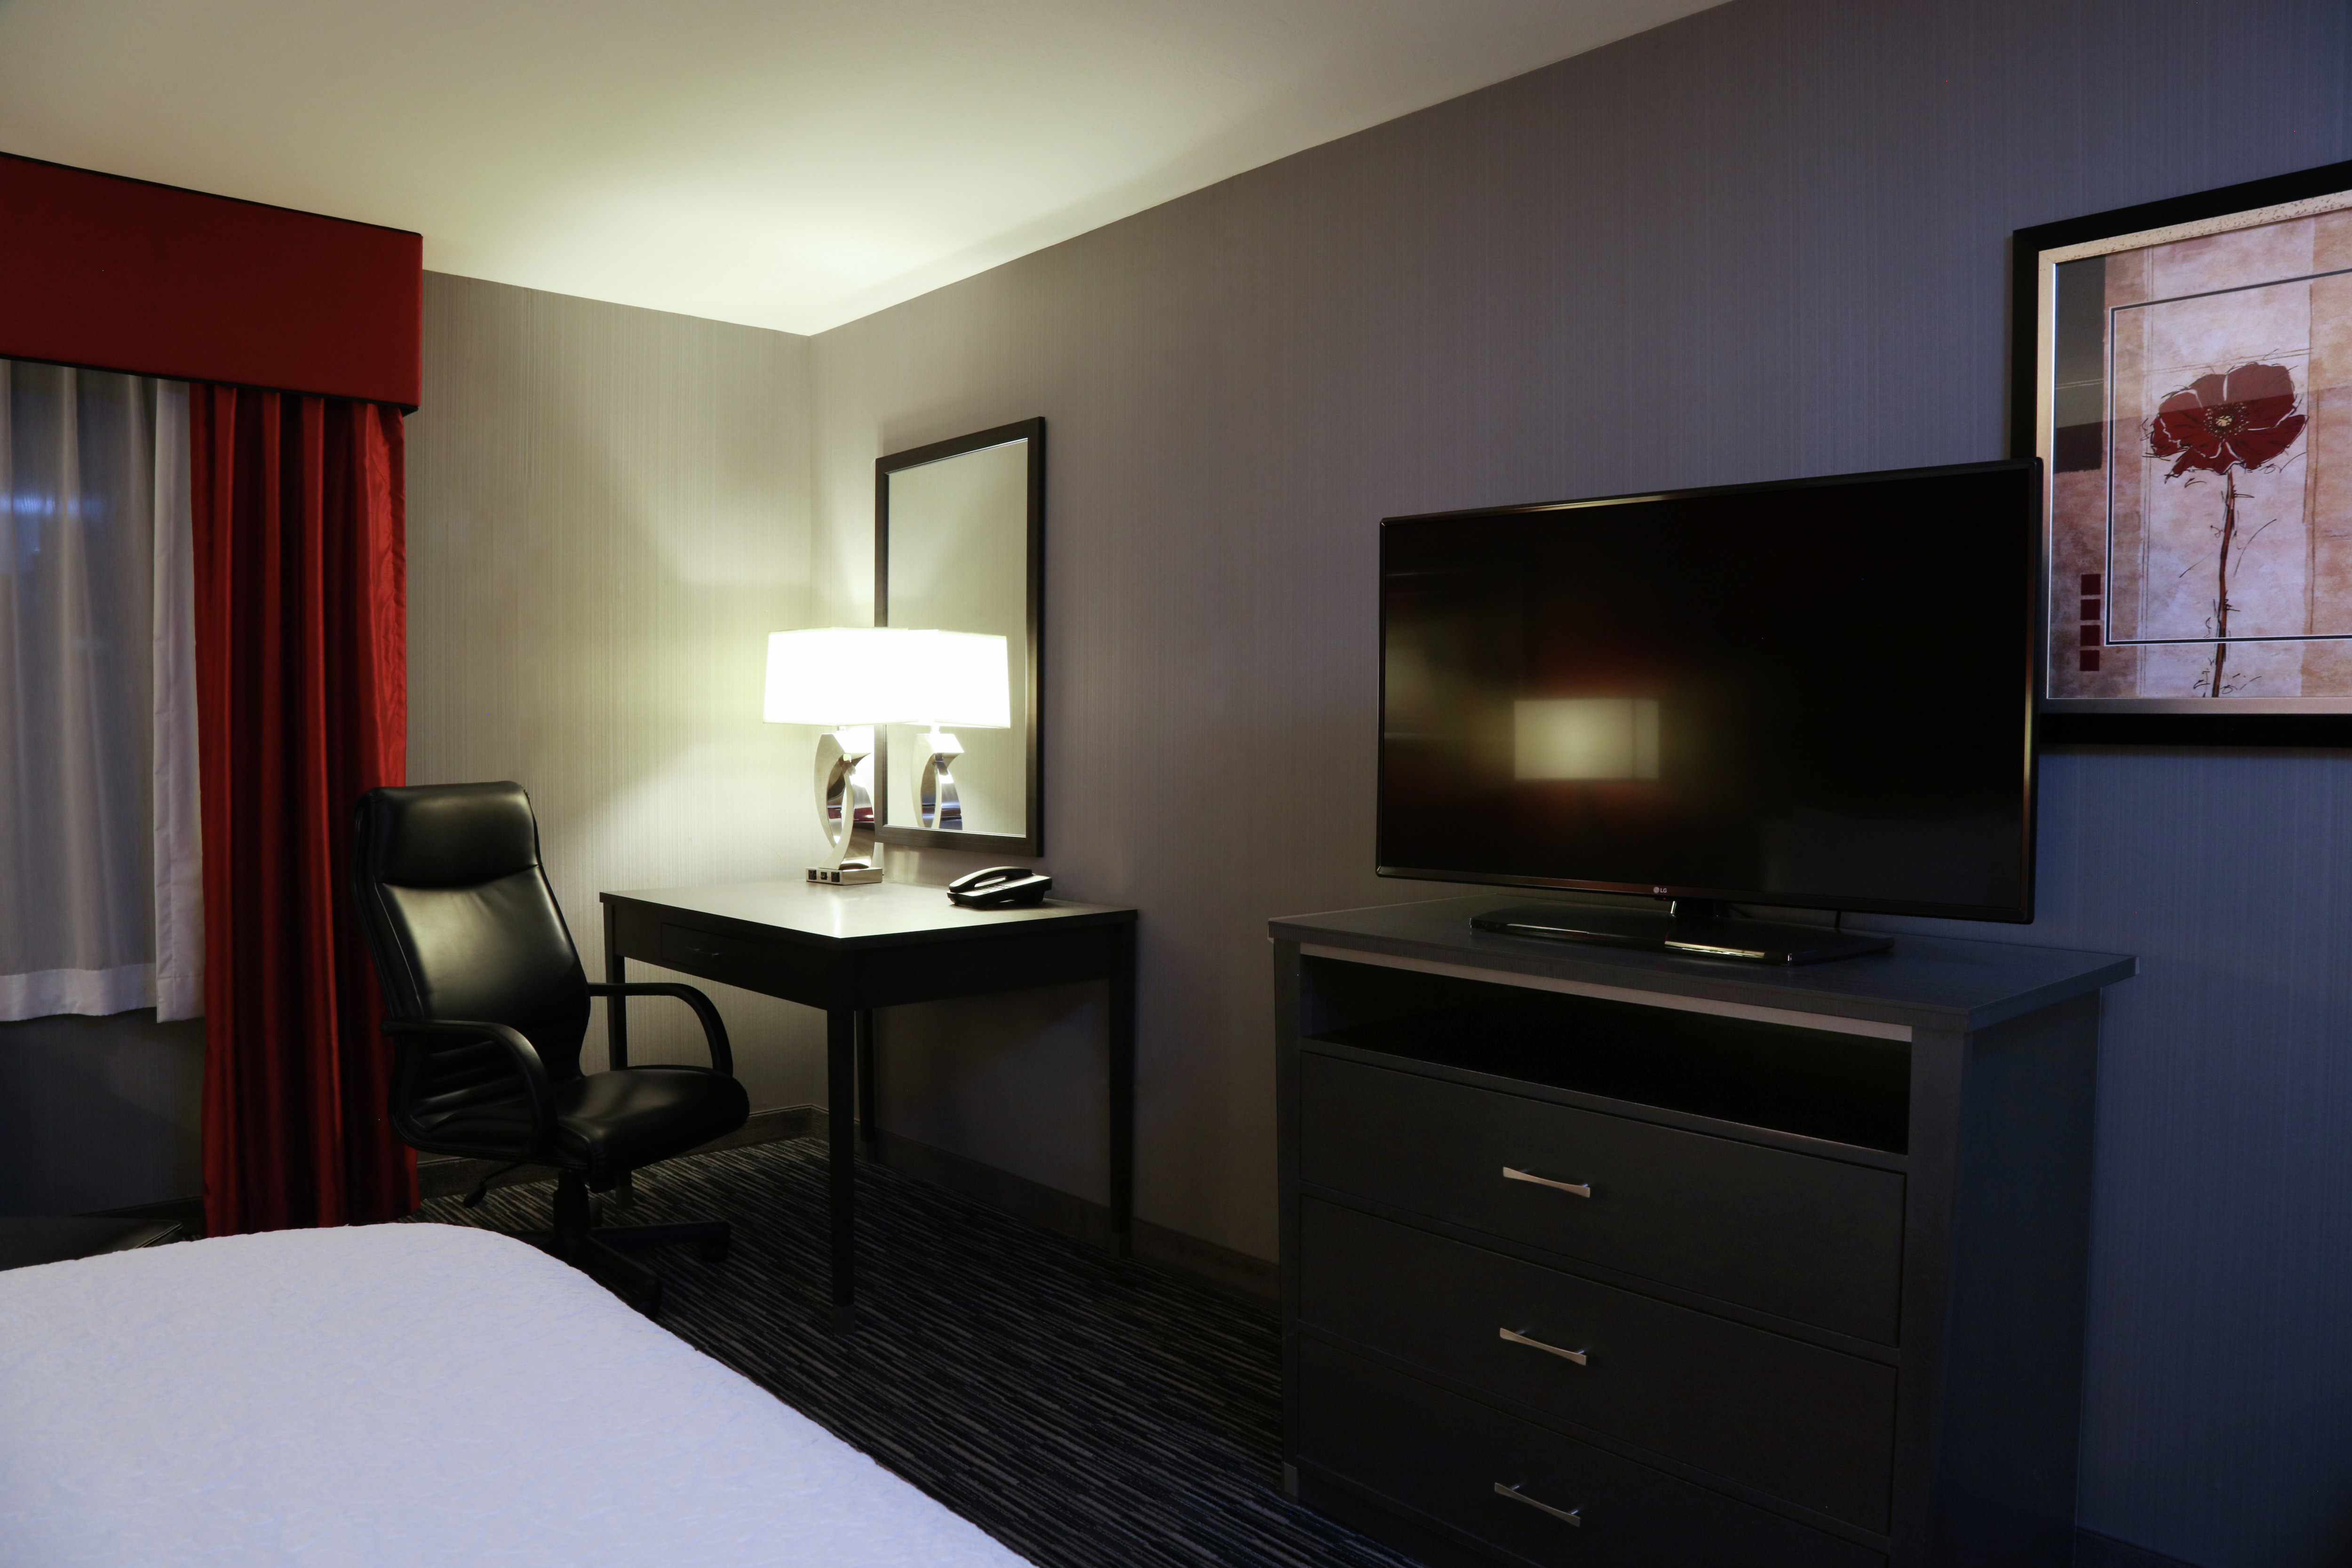 Accessible Guestroom with King Bed, Work Desk, and Room Technology